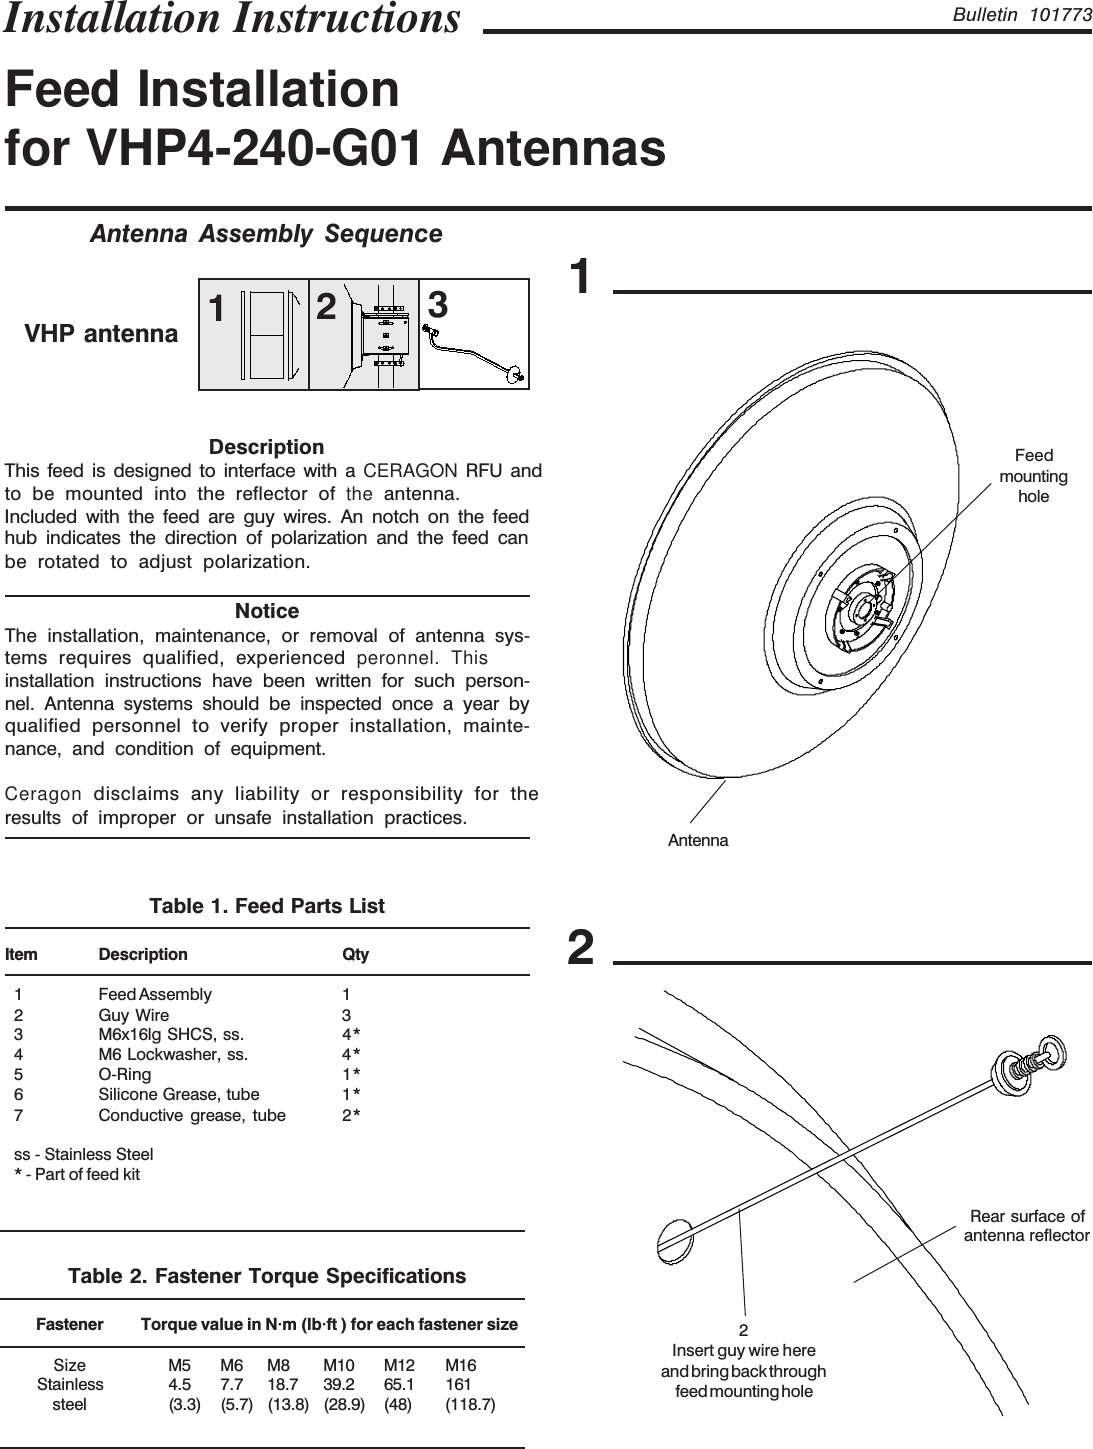 Bulletin 101773Feed Installationfor VHP4-240-G01 AntennasInstallation Instructions12Rear surface ofantenna reflector2Insert guy wire hereand bring back throughfeed mounting holeAntenna Assembly SequenceAntennaFeedmountingholeVHP antenna 213DescriptionNoticeThe installation, maintenance, or removal of antenna sys-tems requires qualified, experienced peronnel. This installation instructions have been written for such person-nel. Antenna systems should be inspected once a year byqualified personnel to verify proper installation, mainte-nance, and condition of equipment.results of improper or unsafe installation practices.Table 1. Feed Parts ListItem Description Qty1 Feed Assembly 12 Guy Wire 33 M6x16lg SHCS, ss. 4*4 M6 Lockwasher, ss. 4*5 O-Ring 1*6 Silicone Grease, tube 1*7 Conductive grease, tube 2*ss - Stainless Steel* - Part of feed kitTable 2. Fastener Torque SpecificationsFastener Torque value in N·m (lb·ft ) for each fastener sizeSize M5 M6 M8 M10 M12 M16Stainless 4.5 7.7 18.7 39.2 65.1 161steel (3.3) (5.7)(13.8)(28.9) (48) (118.7)to be mounted into the reflector of the antenna.Included with the feed are guy wires. An notch on the feedhub indicates the direction of polarization and the feed canbe rotated to adjust polarization.This feed is designed to interface with a CERAGON RFU andCeragon disclaims any liability or responsibility for the